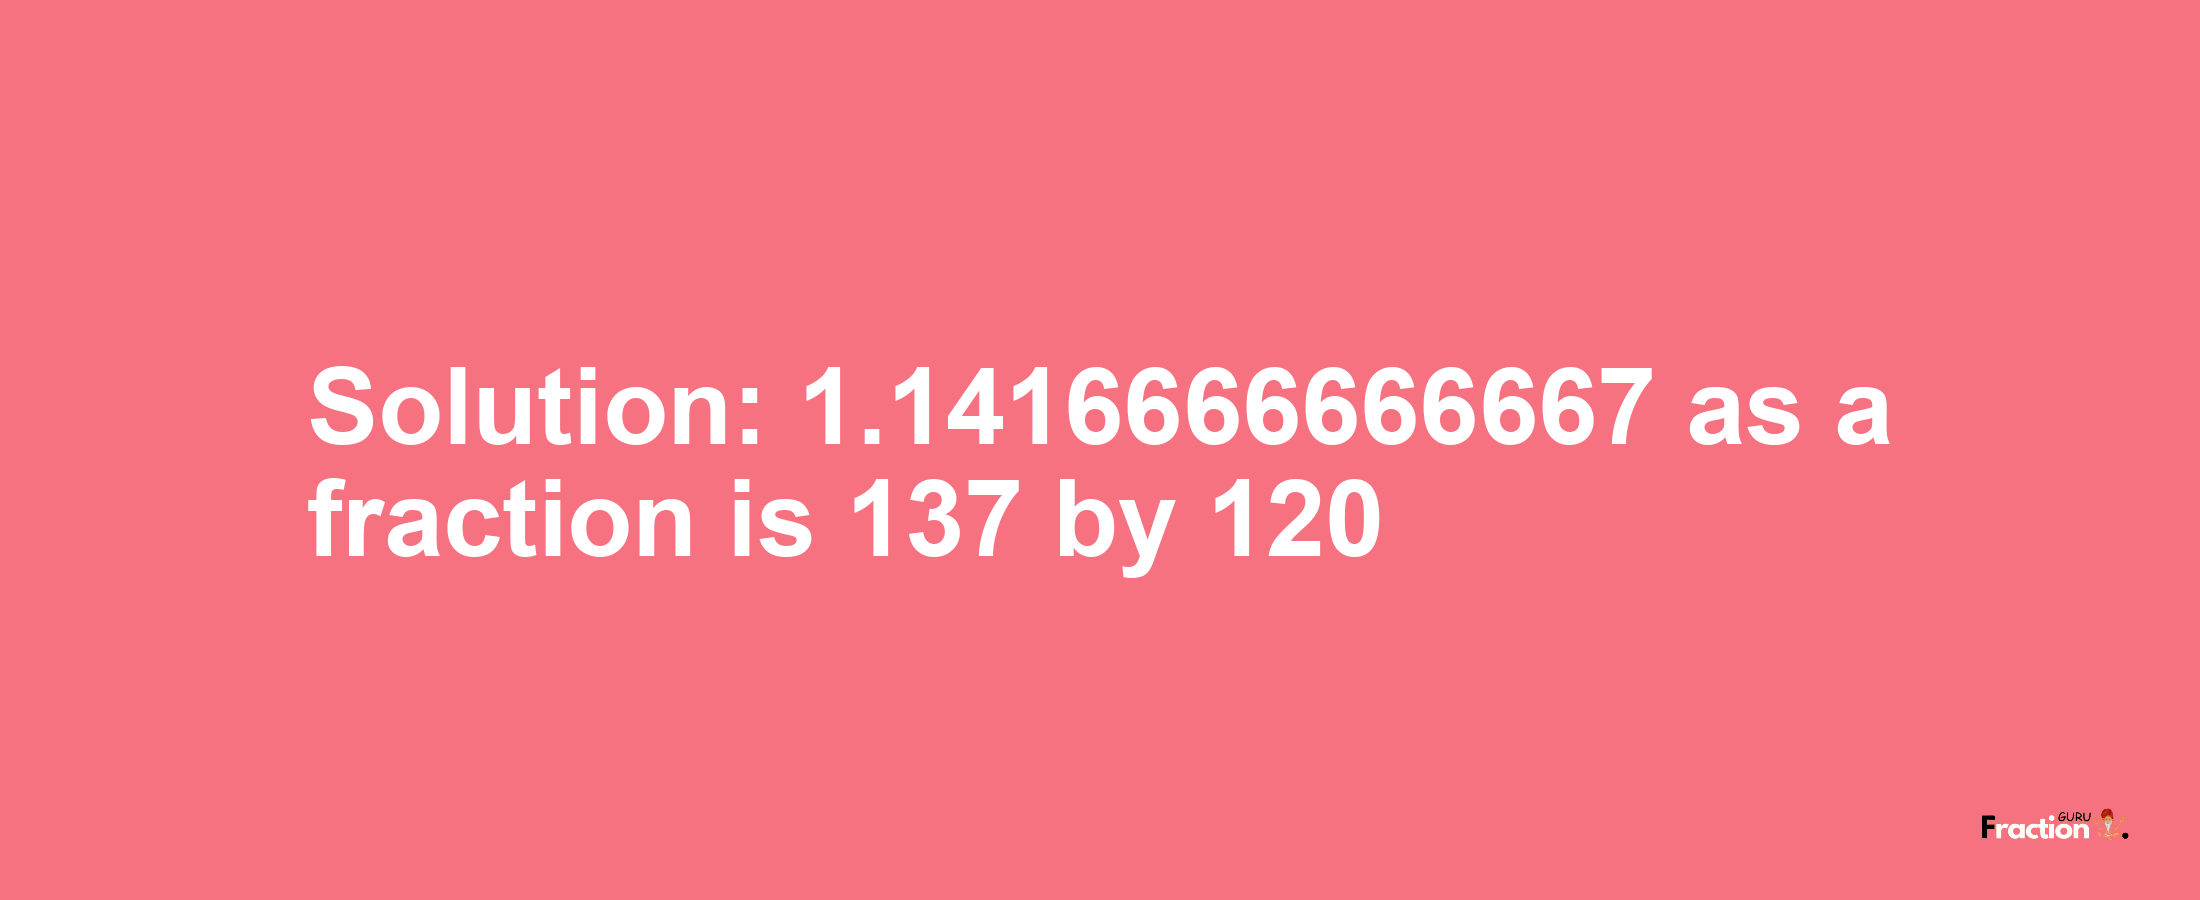 Solution:1.1416666666667 as a fraction is 137/120